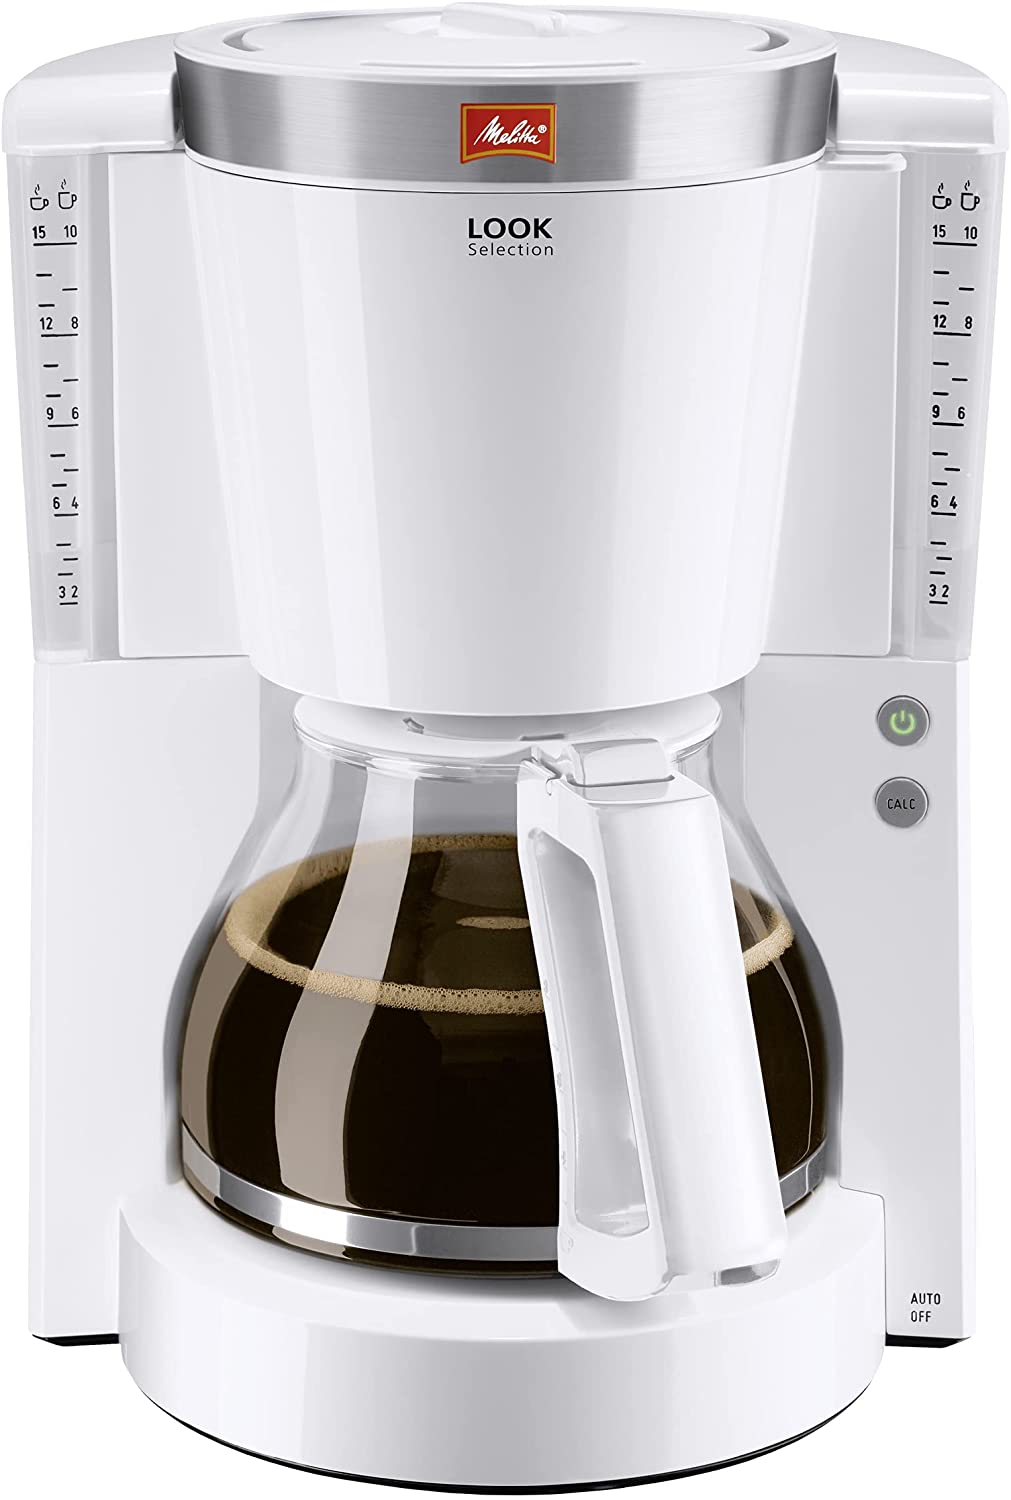 Melitta 1011-03 Look IV Selection Coffee Filter Machine, White